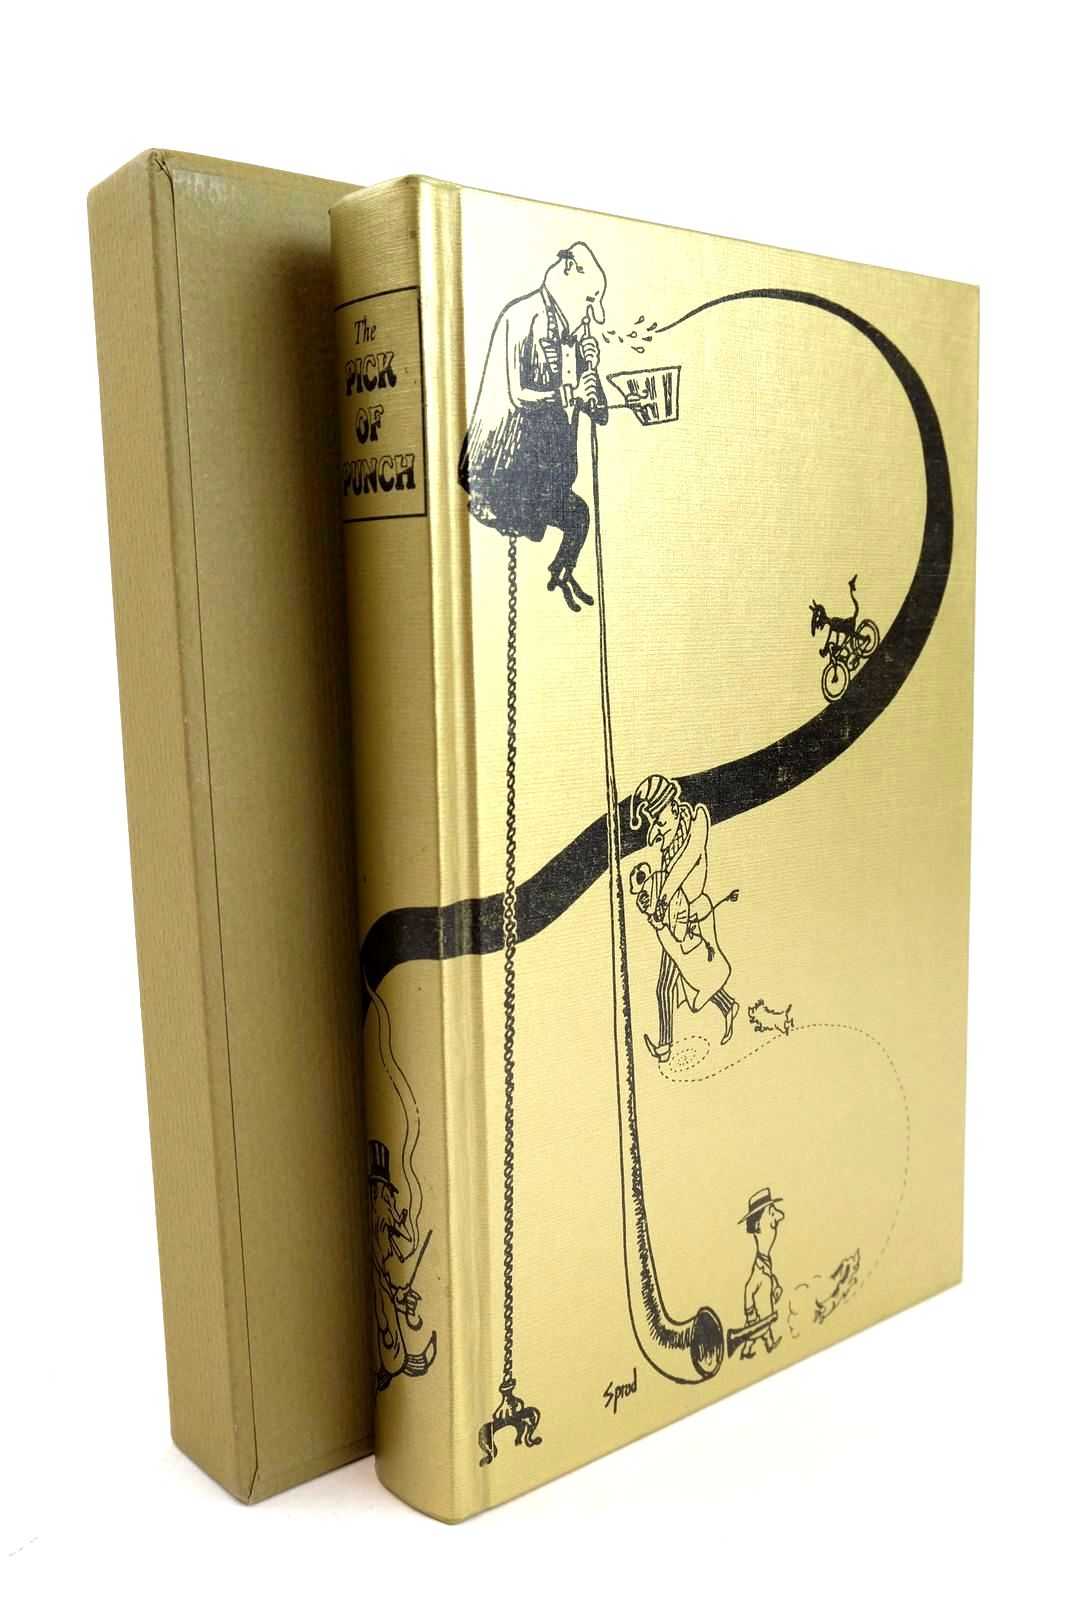 Photo of THE PICK OF PUNCH written by Kington, Miles published by Folio Society (STOCK CODE: 1326774)  for sale by Stella & Rose's Books